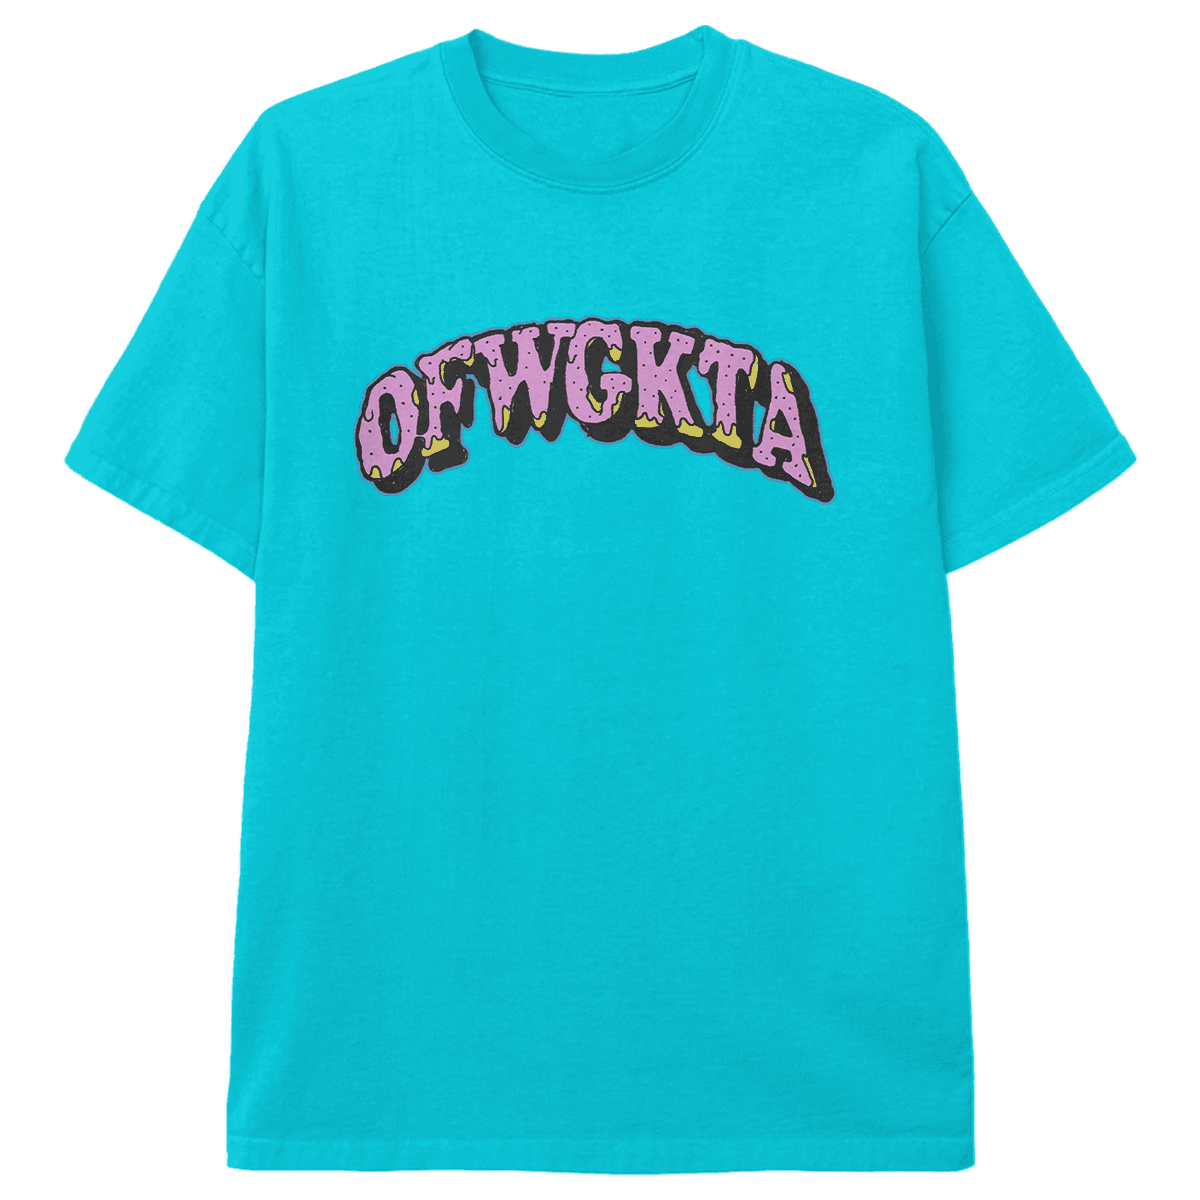 Frosting T-shirt - Turquoise-Odd Future